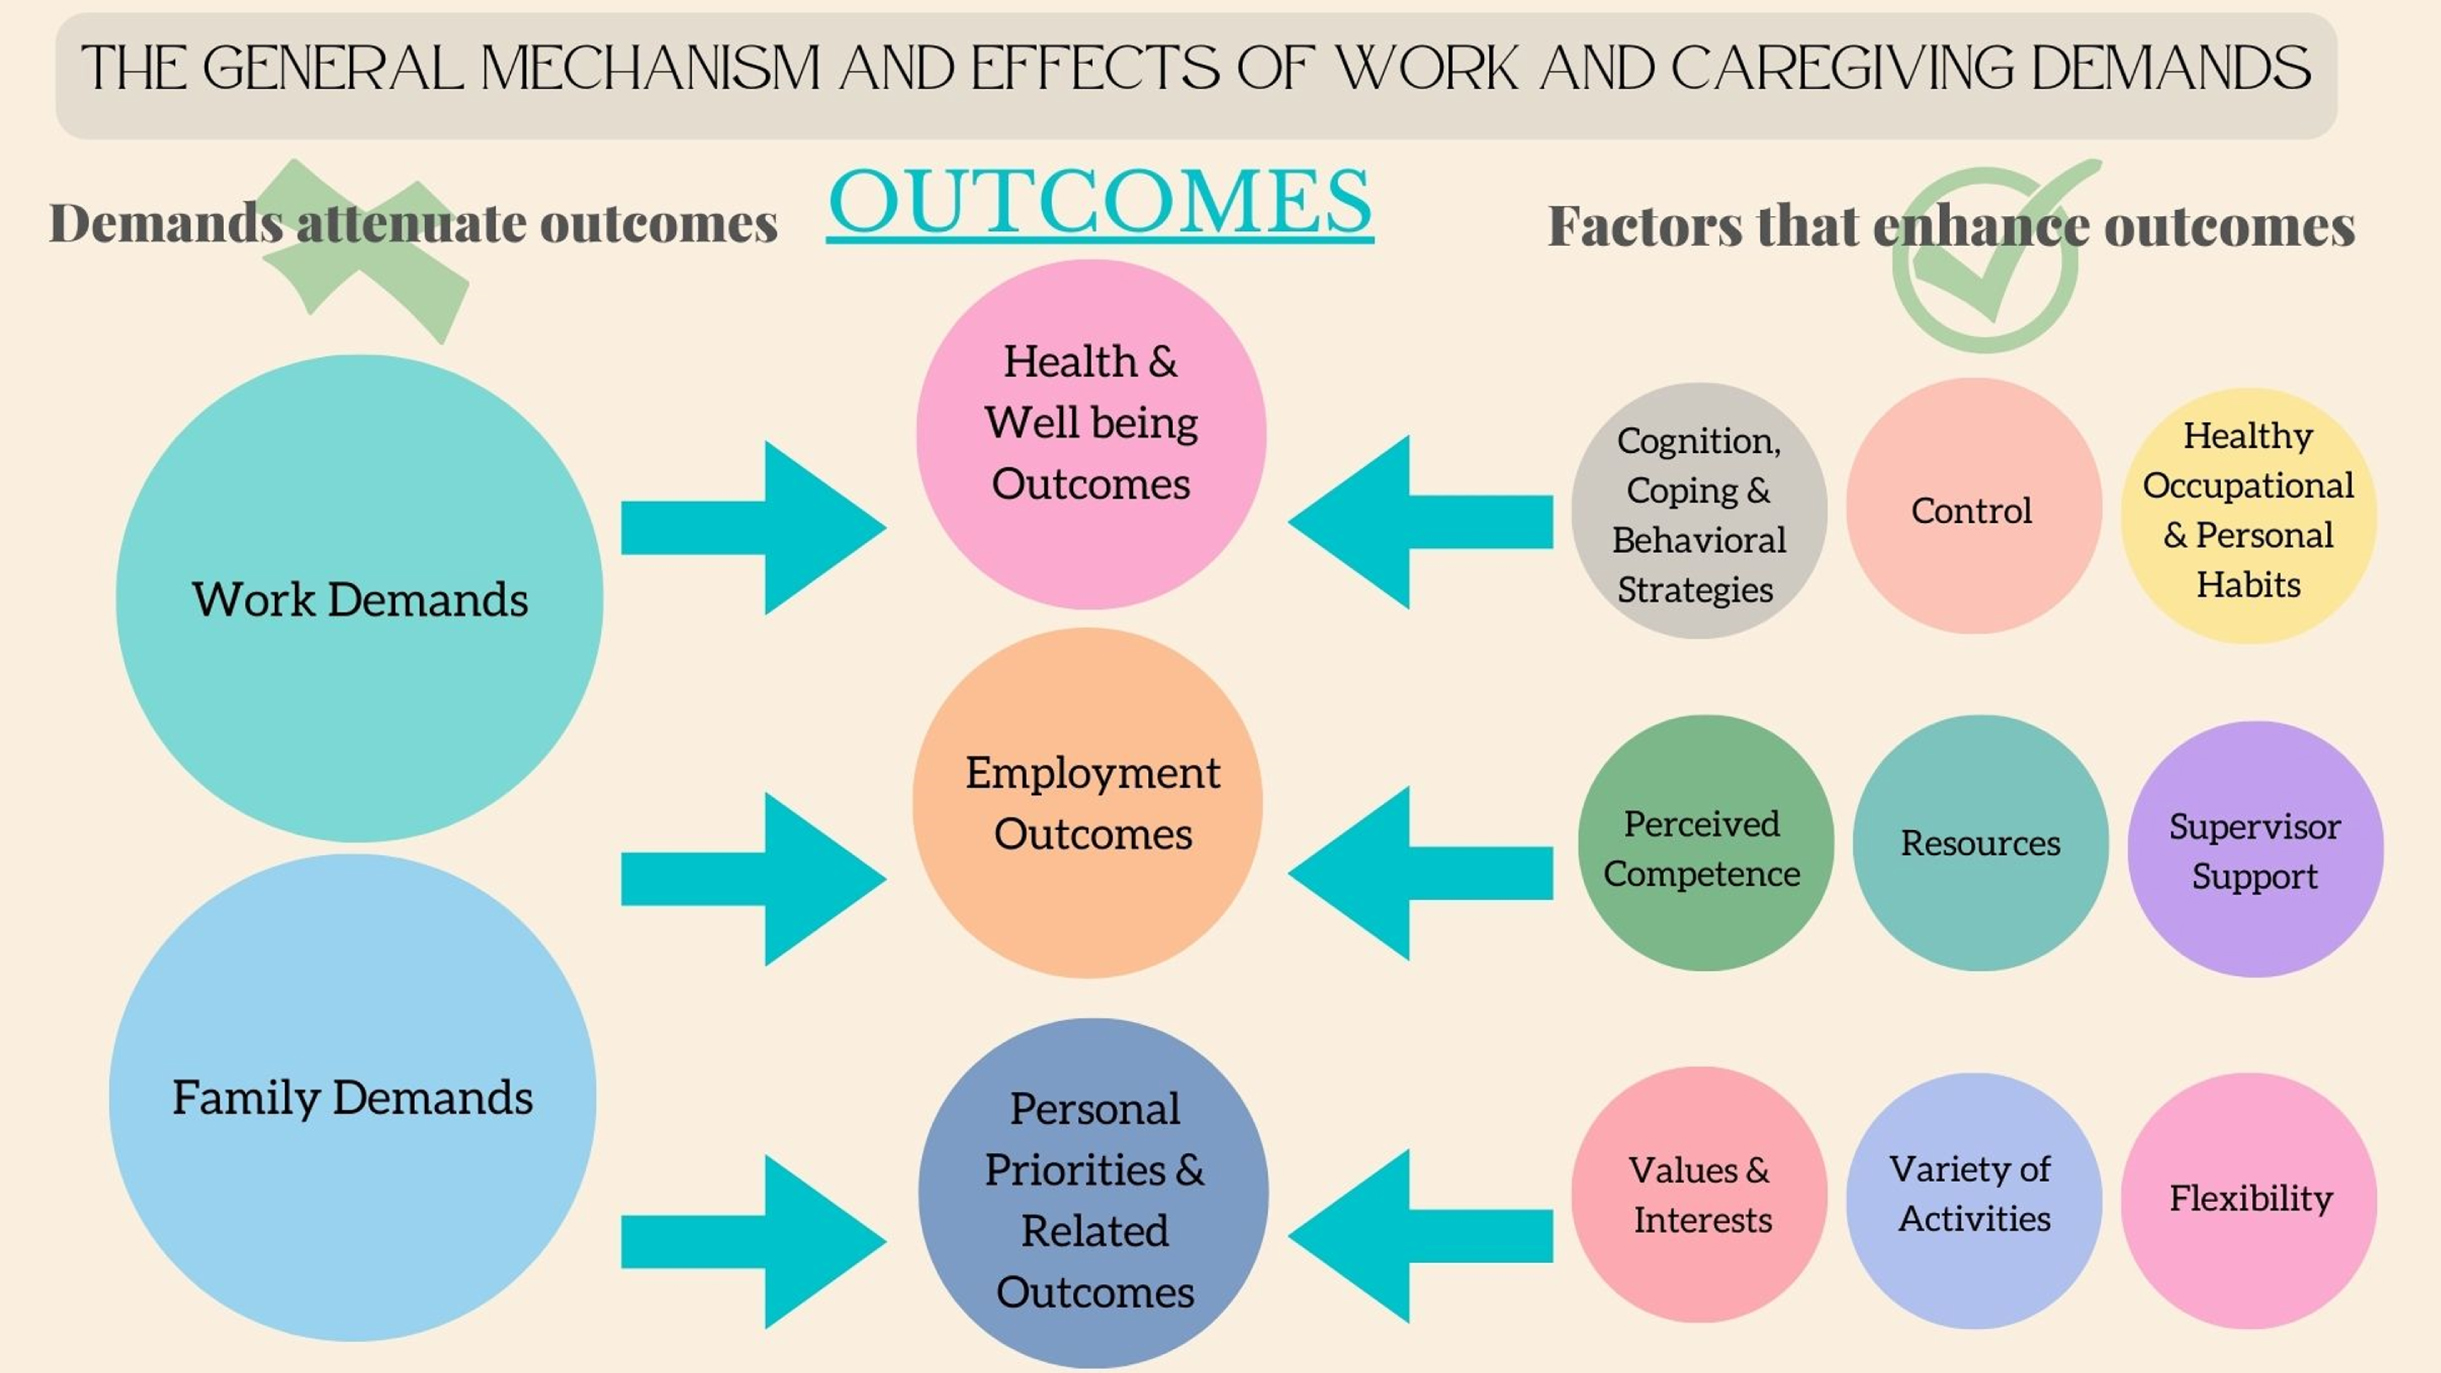 The General Mechanism and Effects of Work and Caregiving Demands.